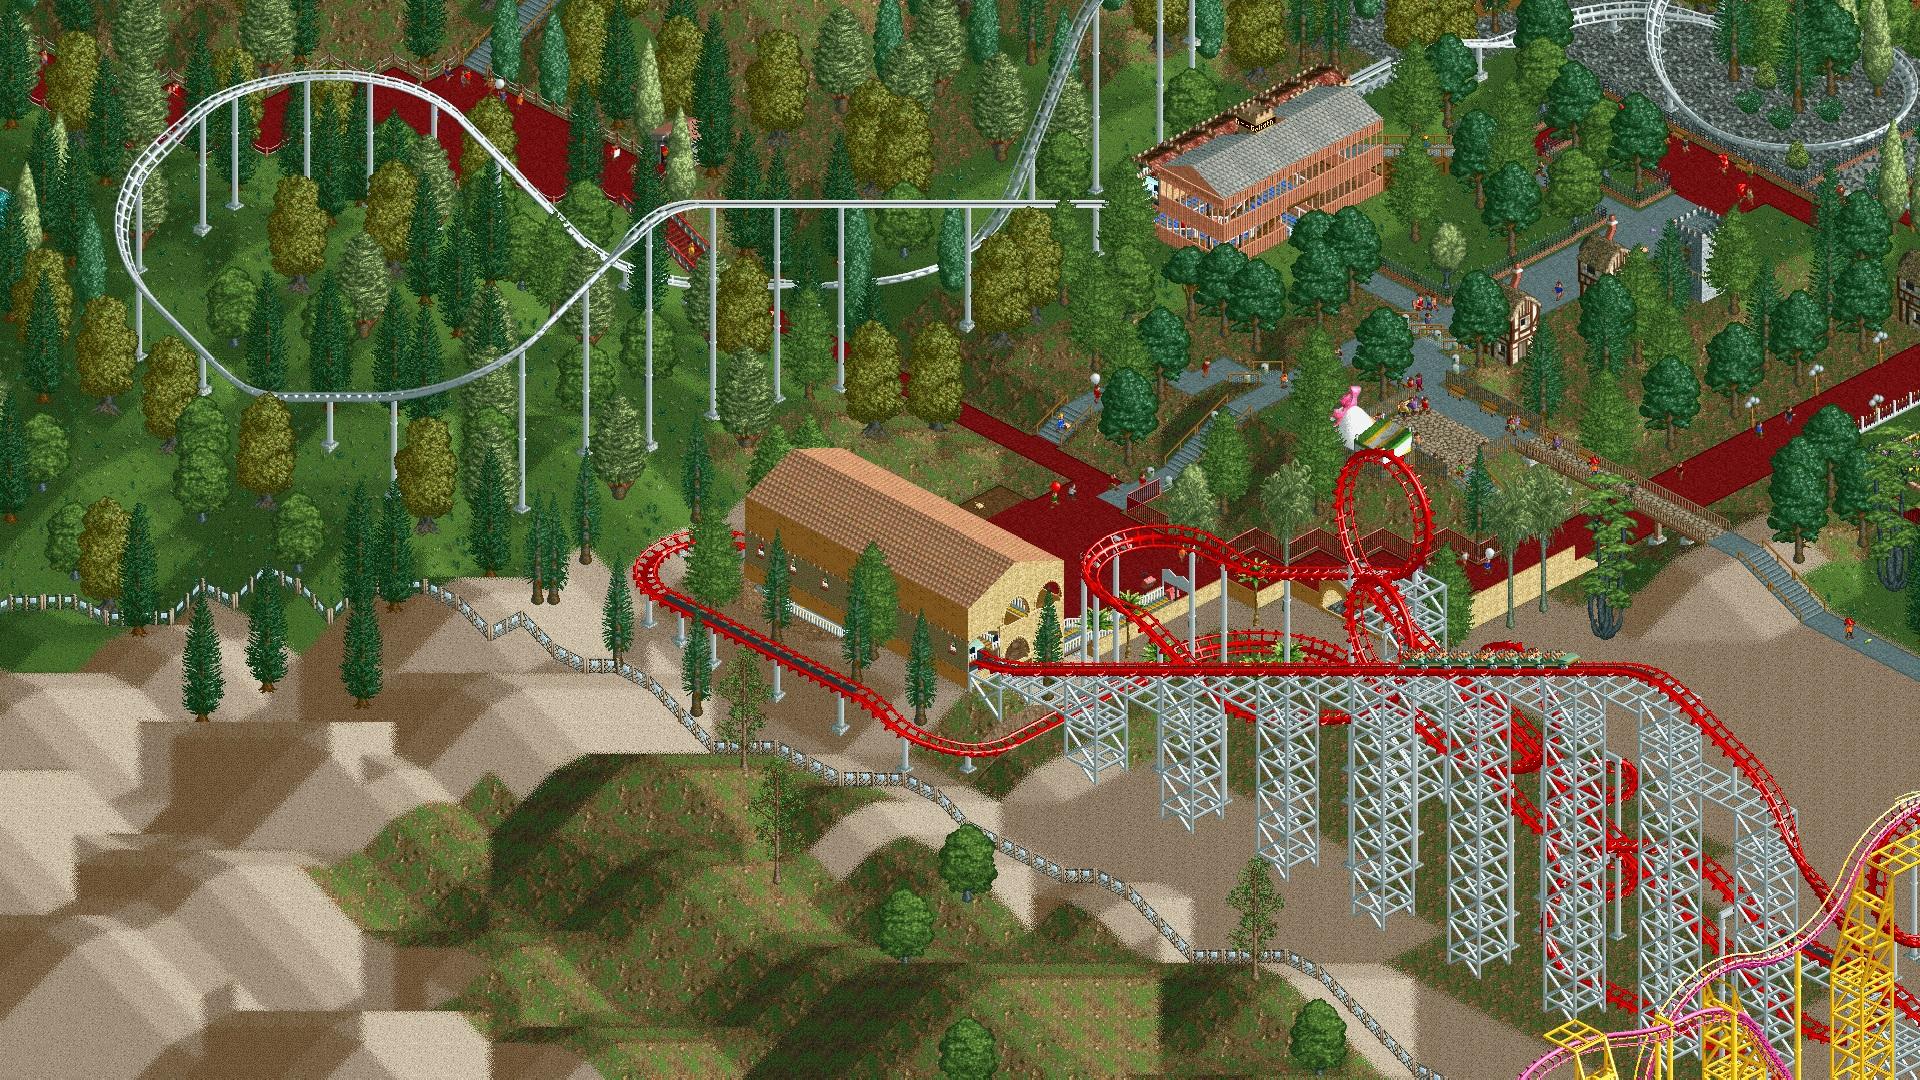 RollerCoaster Tycoon Classic - RollerCoaster Tycoon - The Ultimate Theme  park Sim